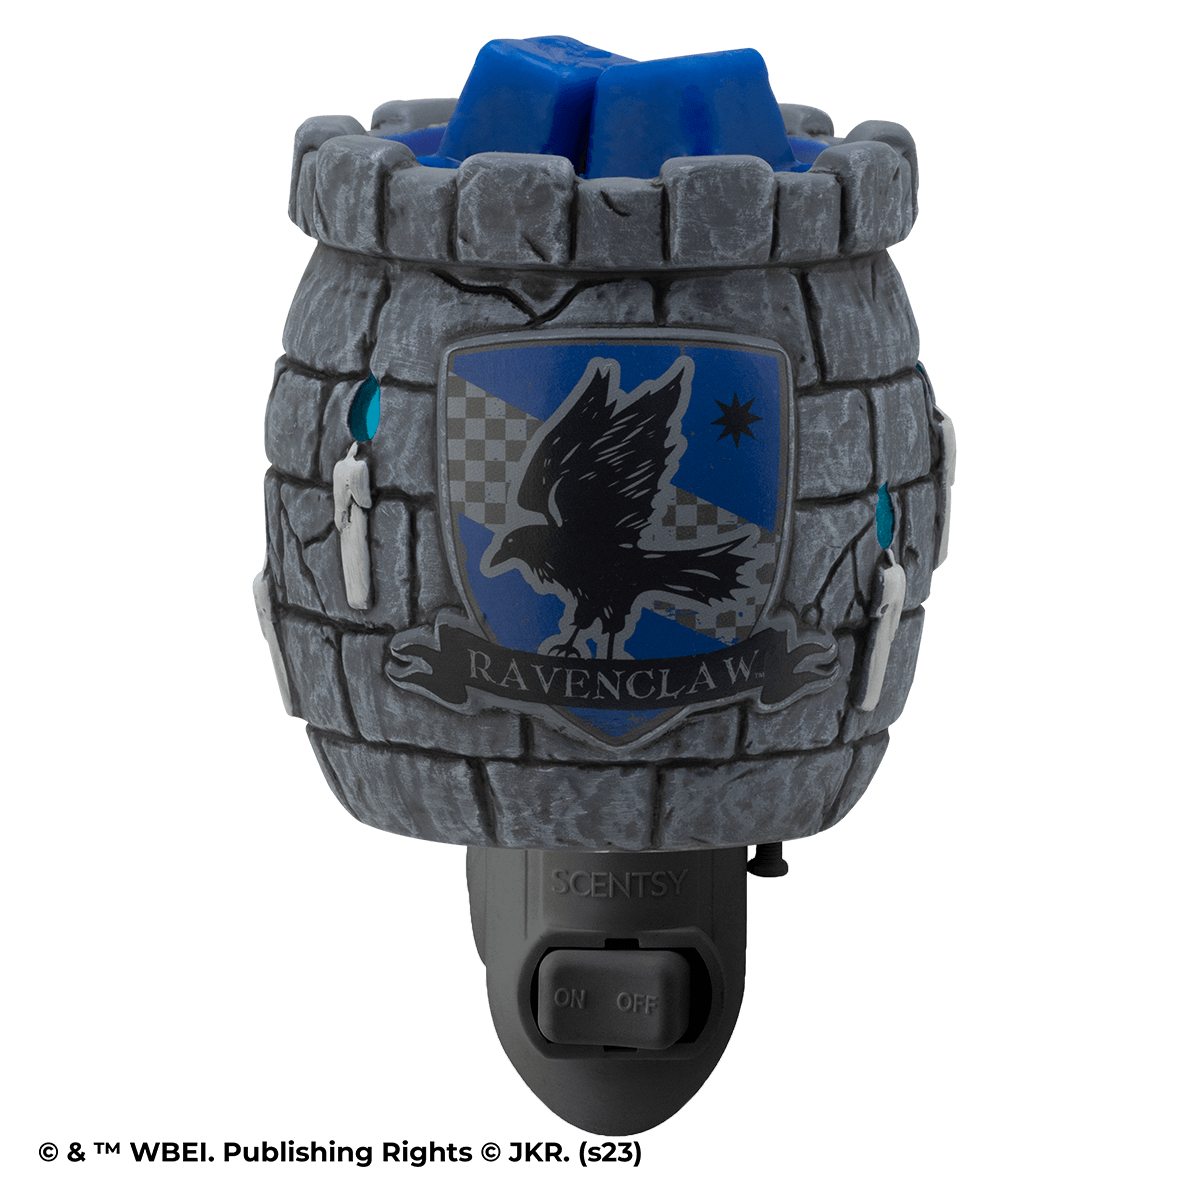 ScentsyMiniWarmer-RavenClaw.png